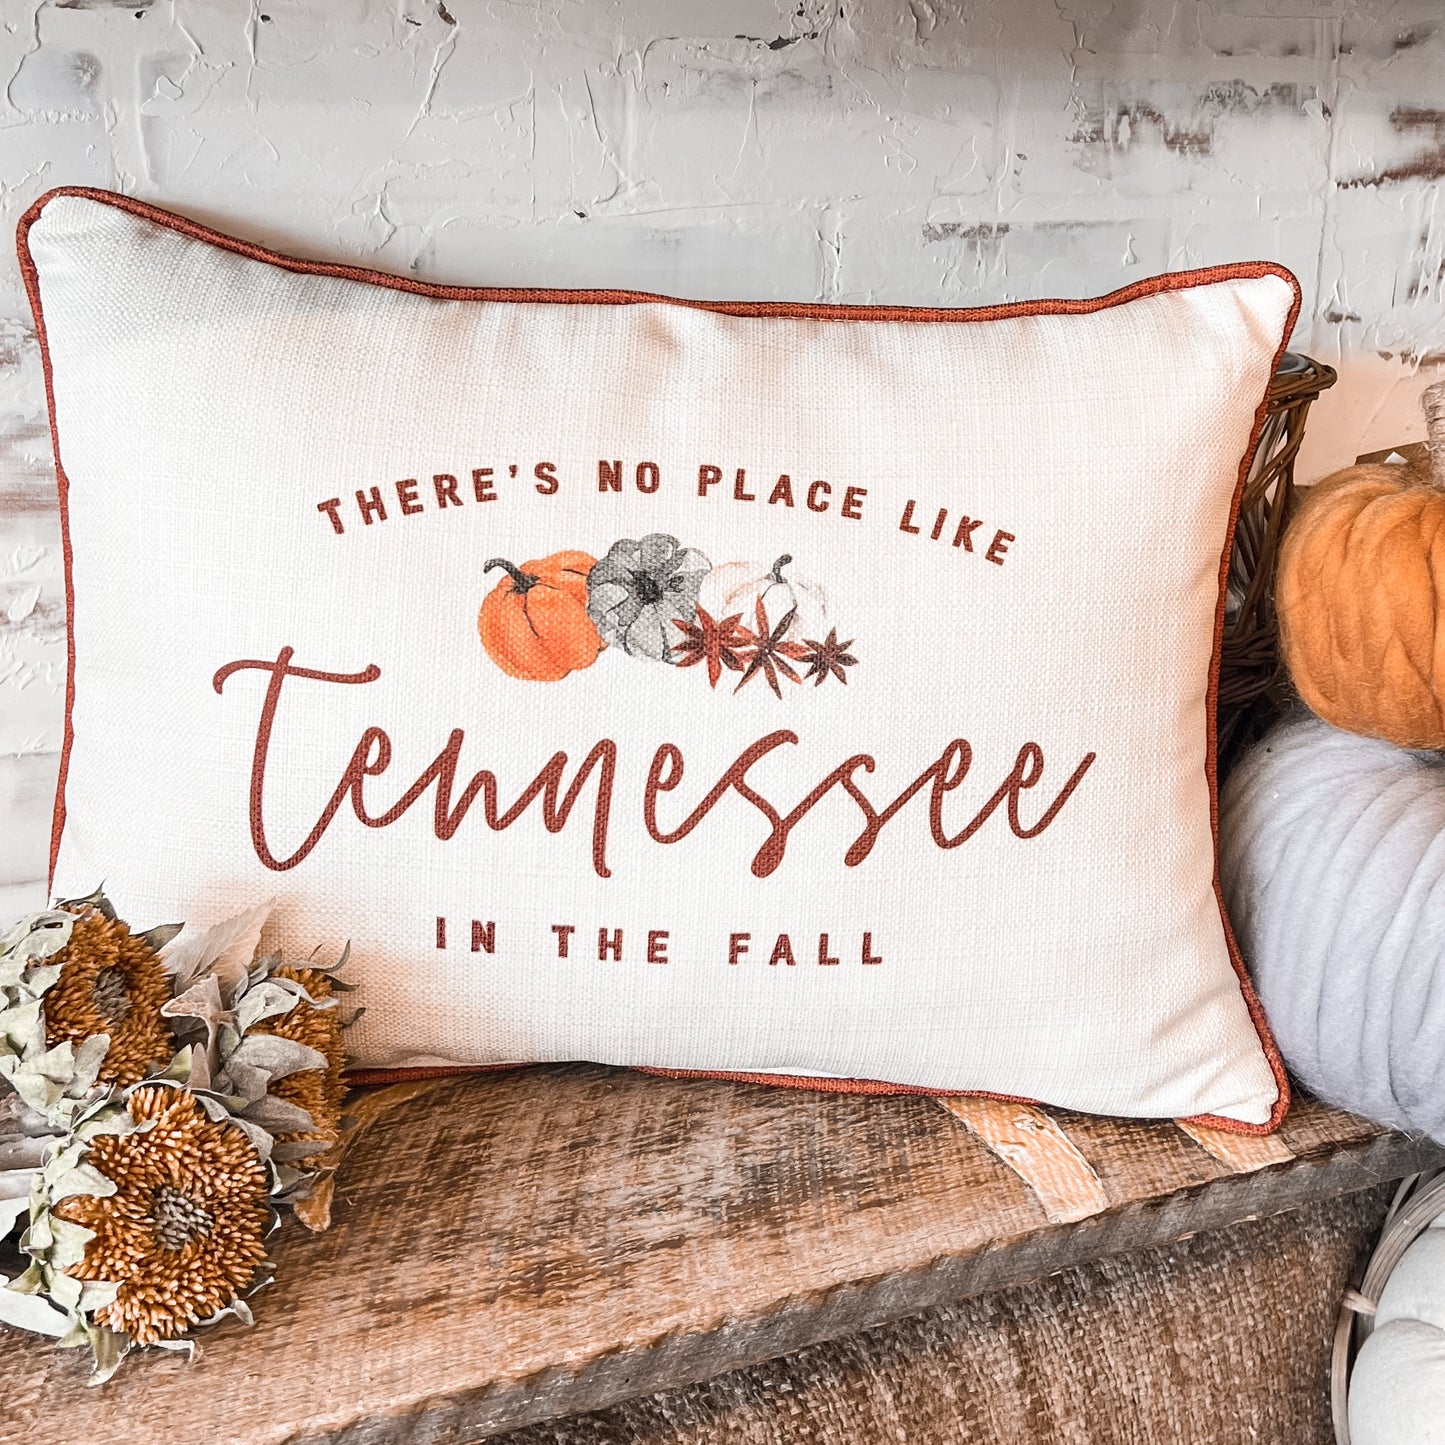 Tennessee in the Fall Pillow